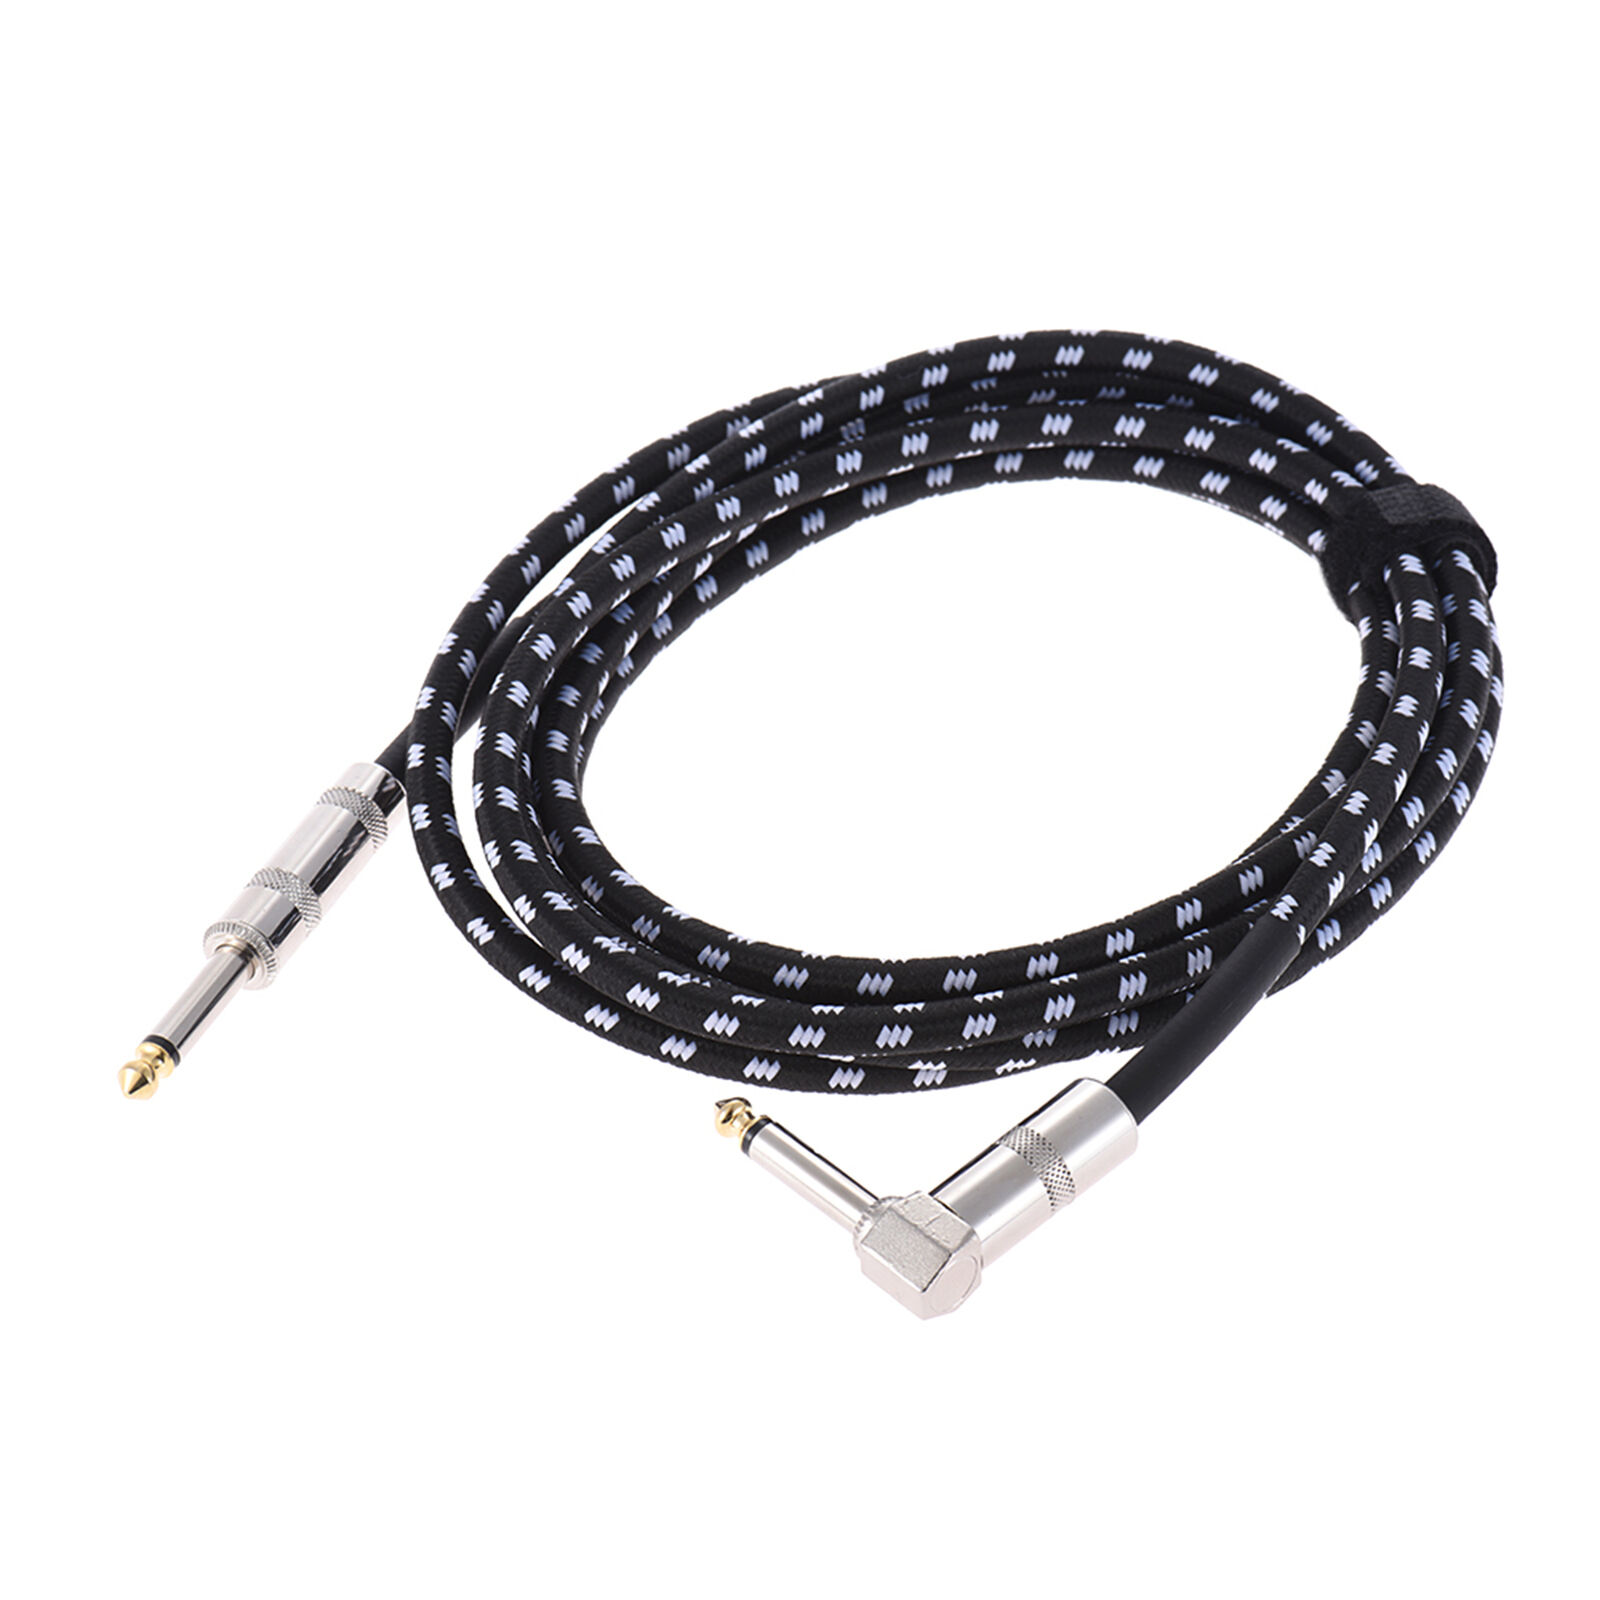 10 Feet Electric Guitar Bass Musical Instrument 10ft Cable Cord